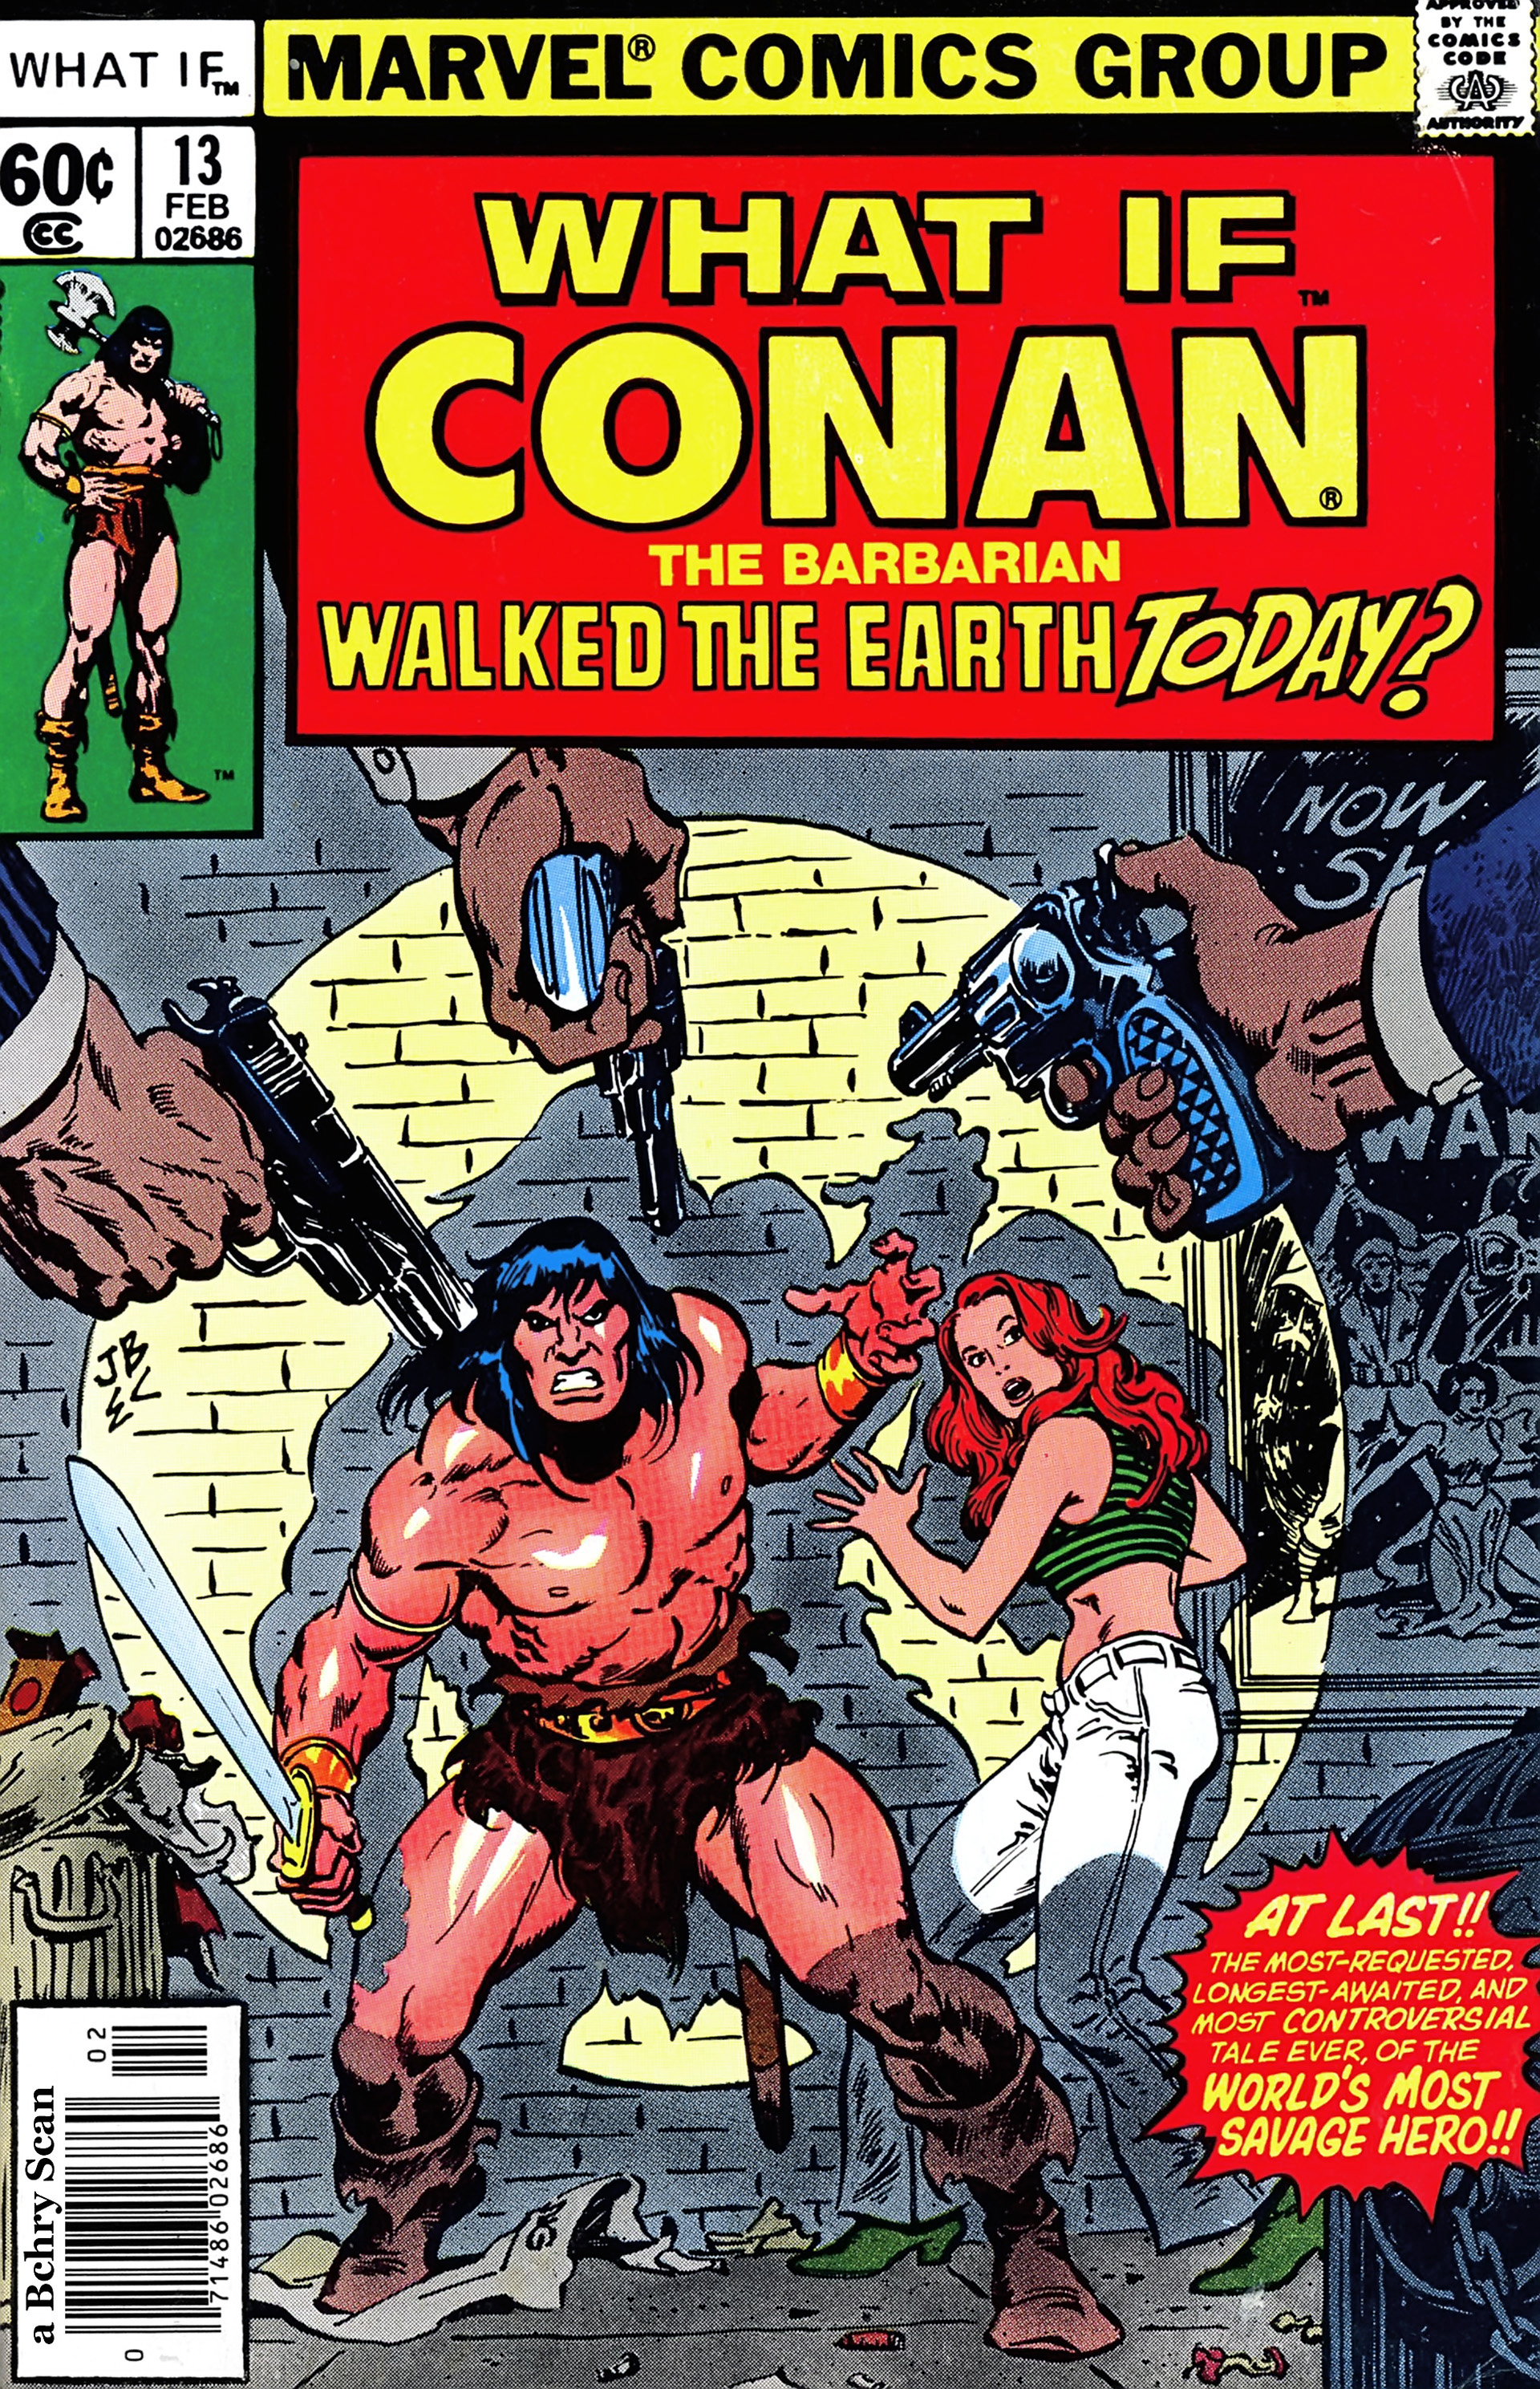 What If? (1977) 13_-_Conan_The_Barbarian_walked_the_Earth_Today Page 1